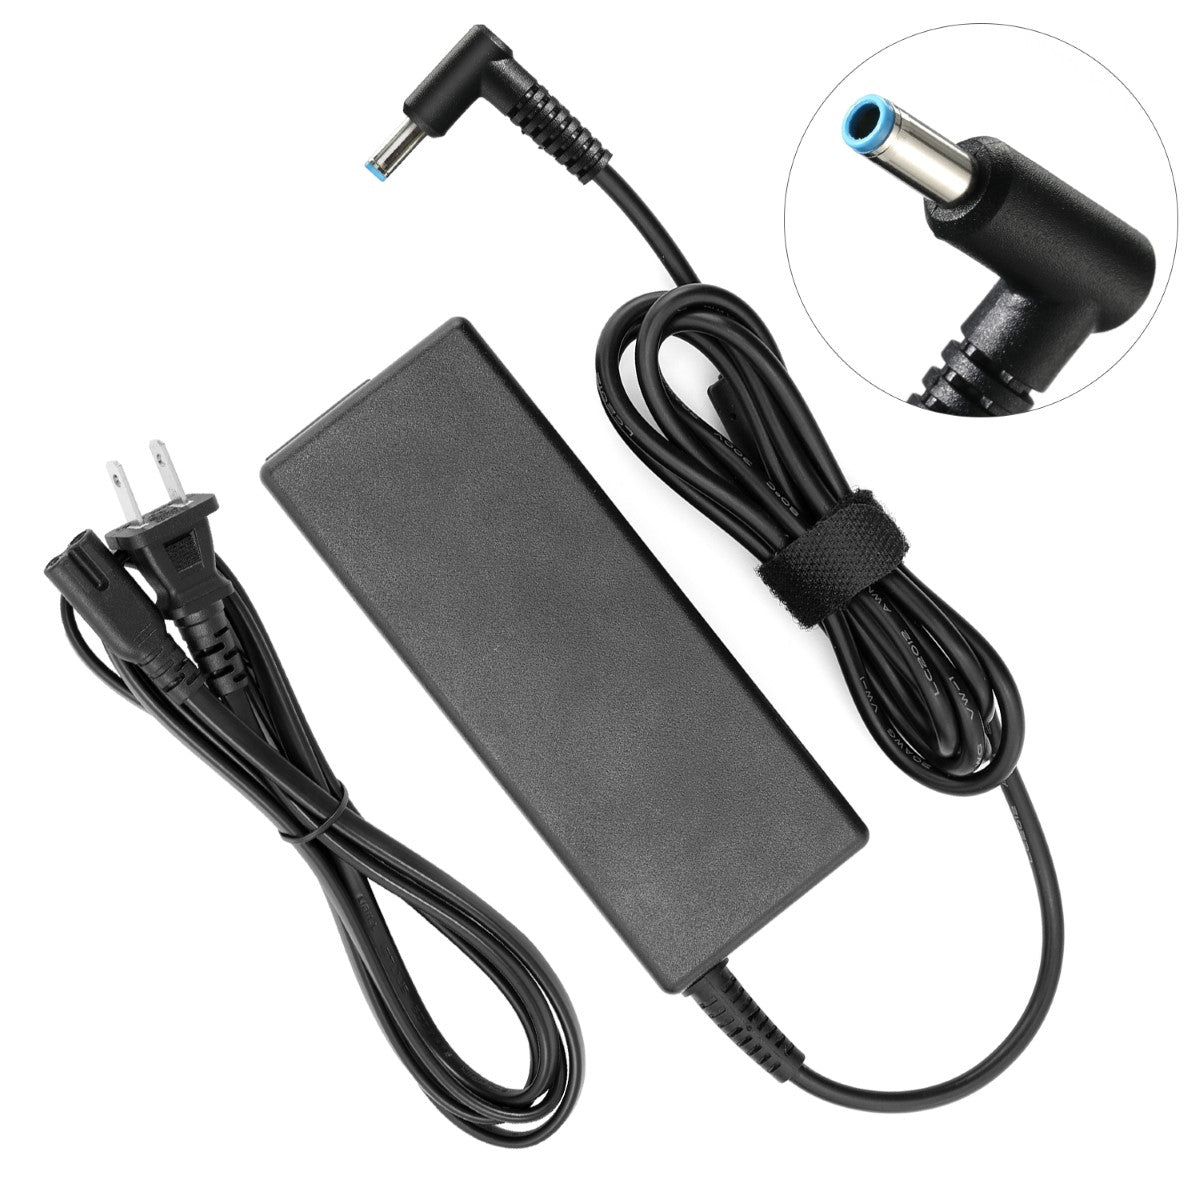 AC Adapter Charger for HP Envy TouchSmart 15-j011dx Notebook.